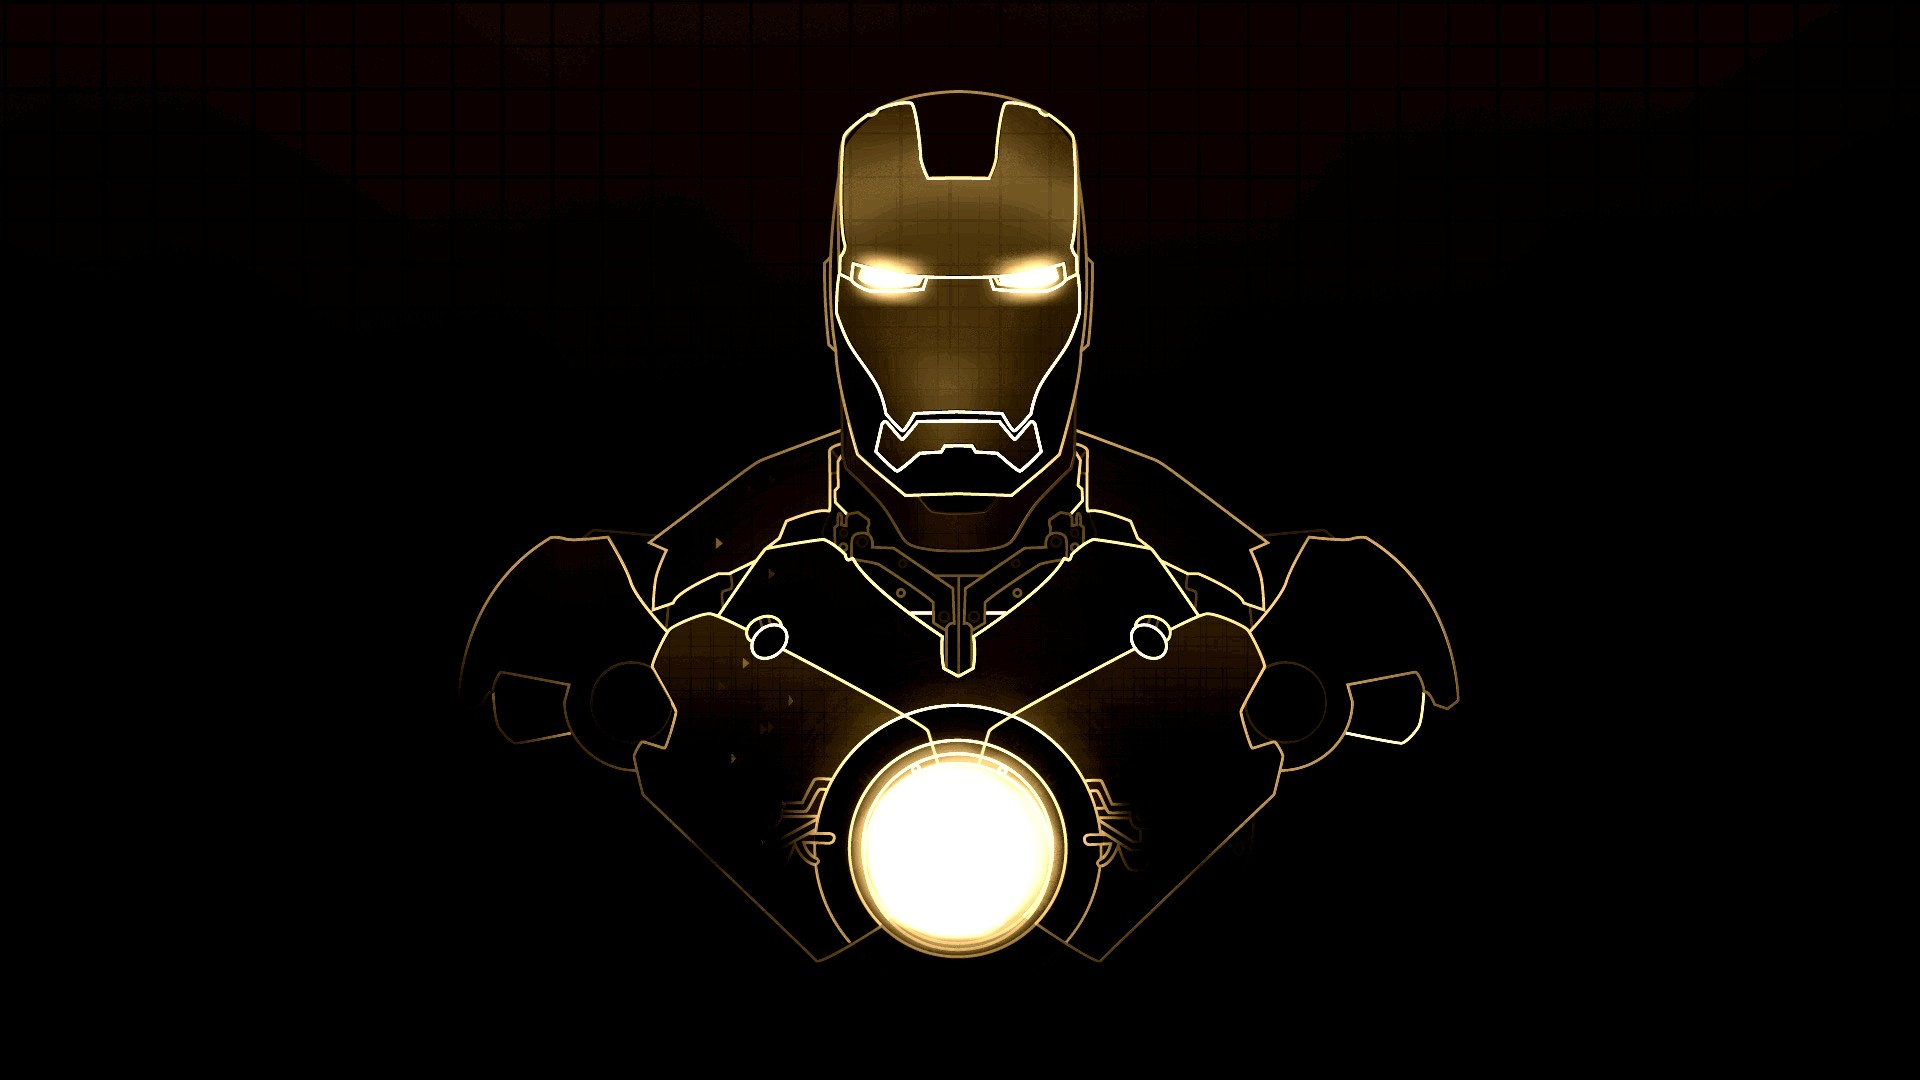  Wallpaper Abyss Explore the Collection Iron Man Movie Iron Man 315318 1920x1080